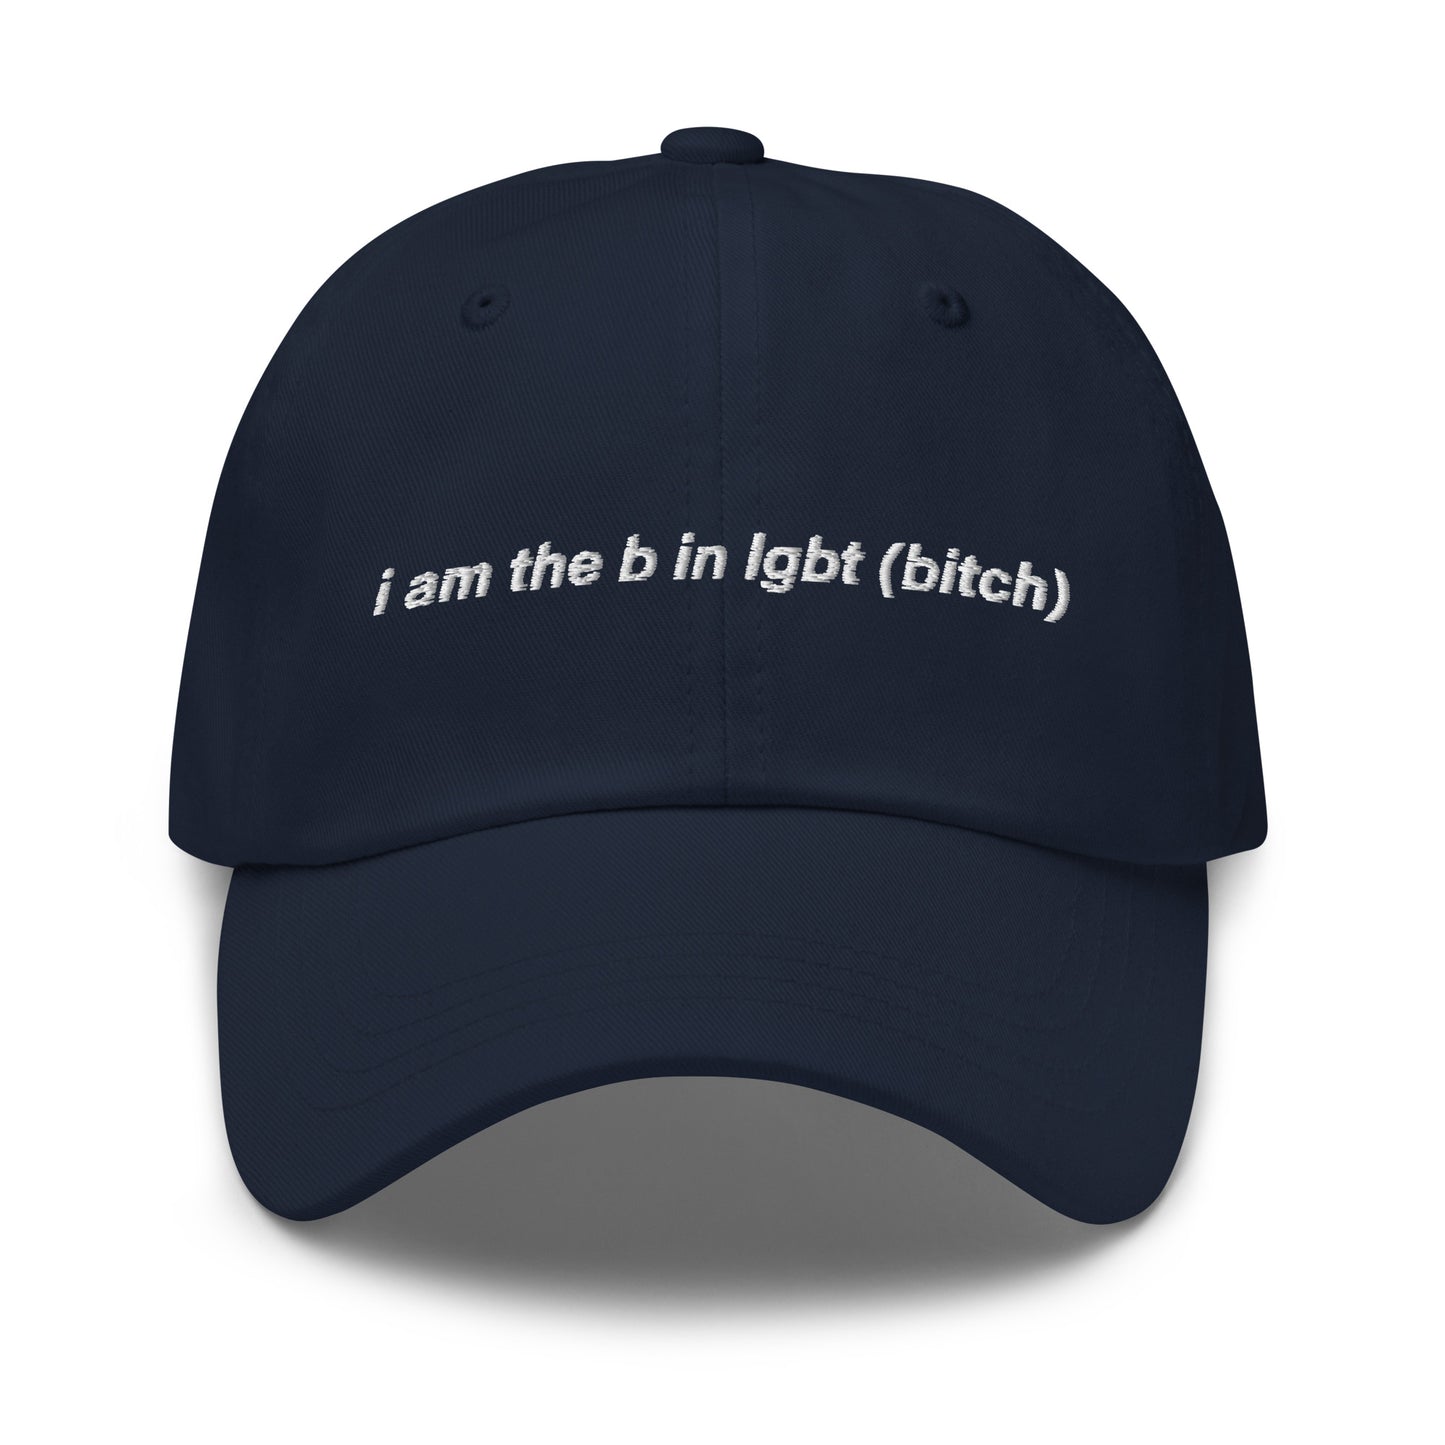 i am the b in lgbt hat